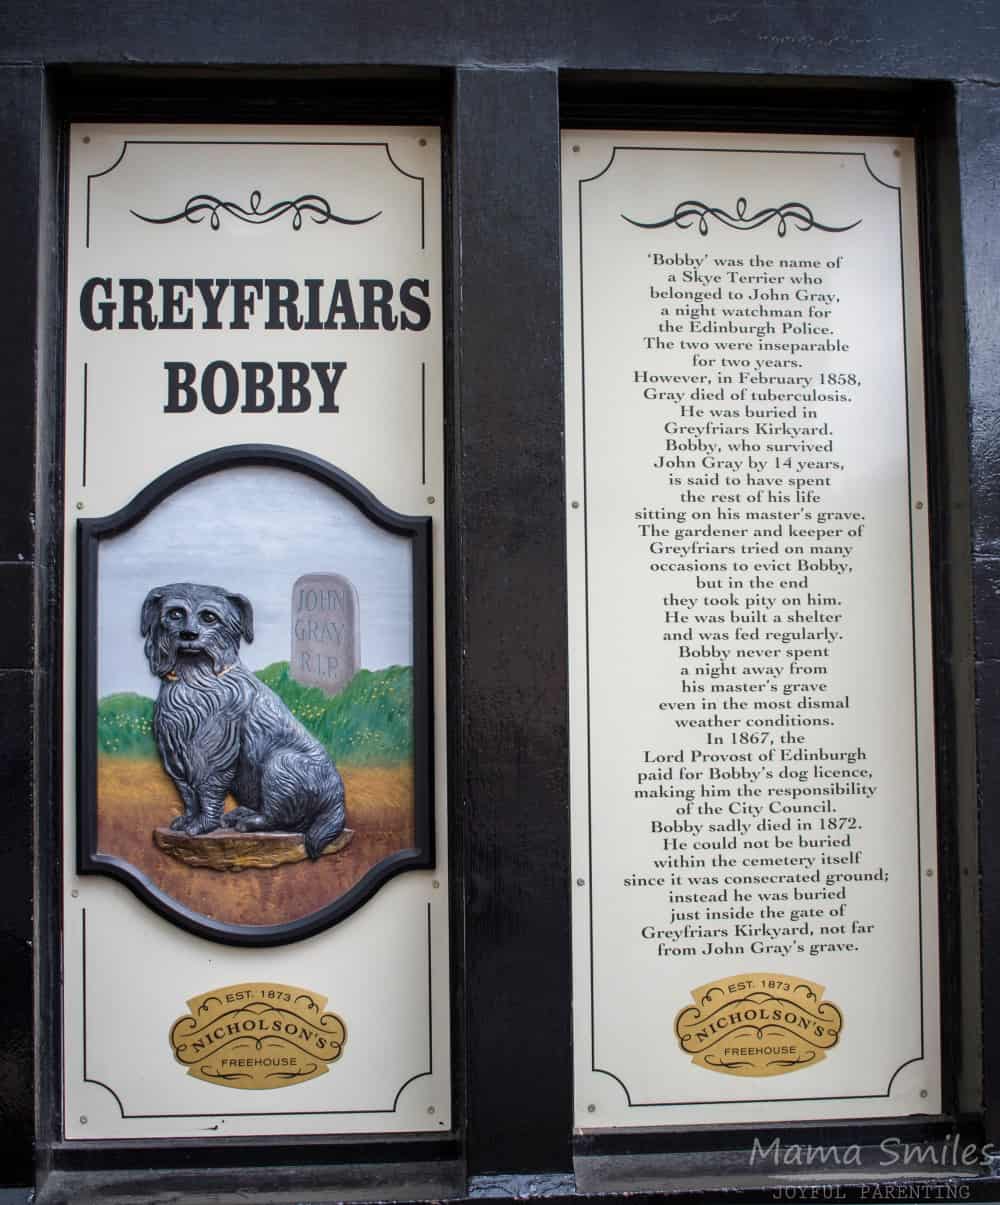 The story of Greyfriars Bobby